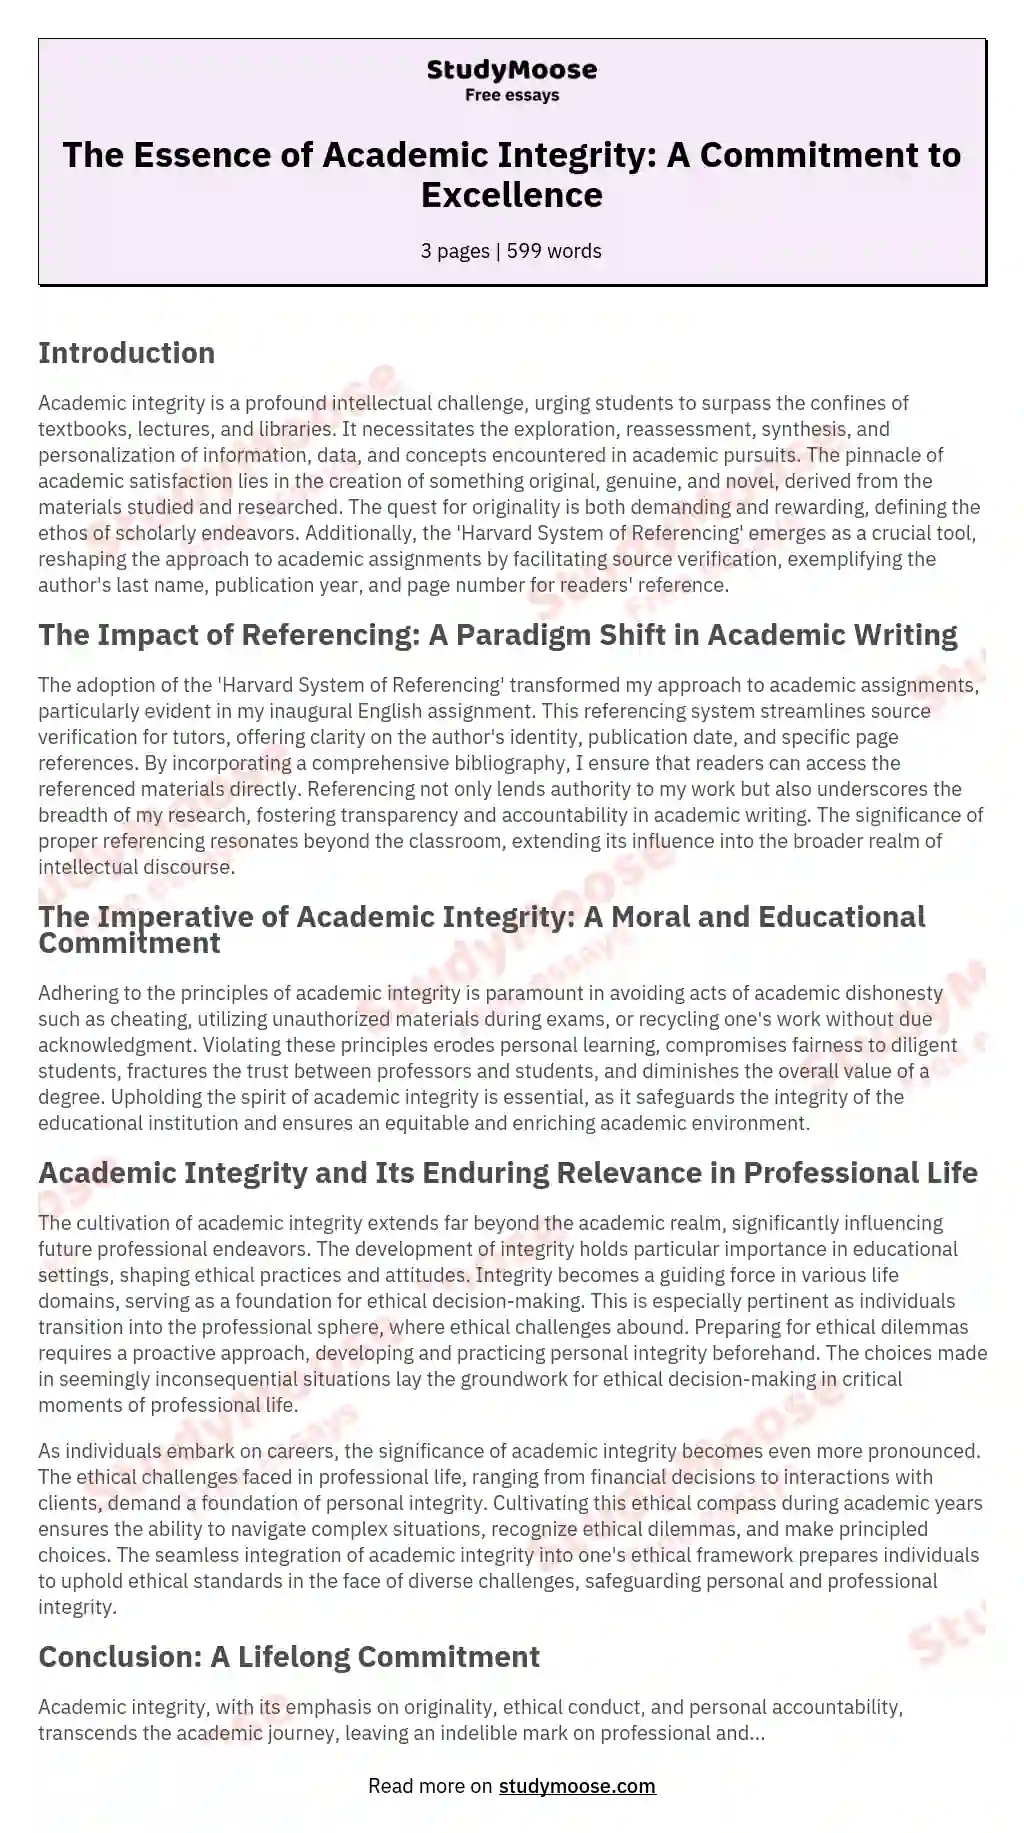 The Essence of Academic Integrity: A Commitment to Excellence essay